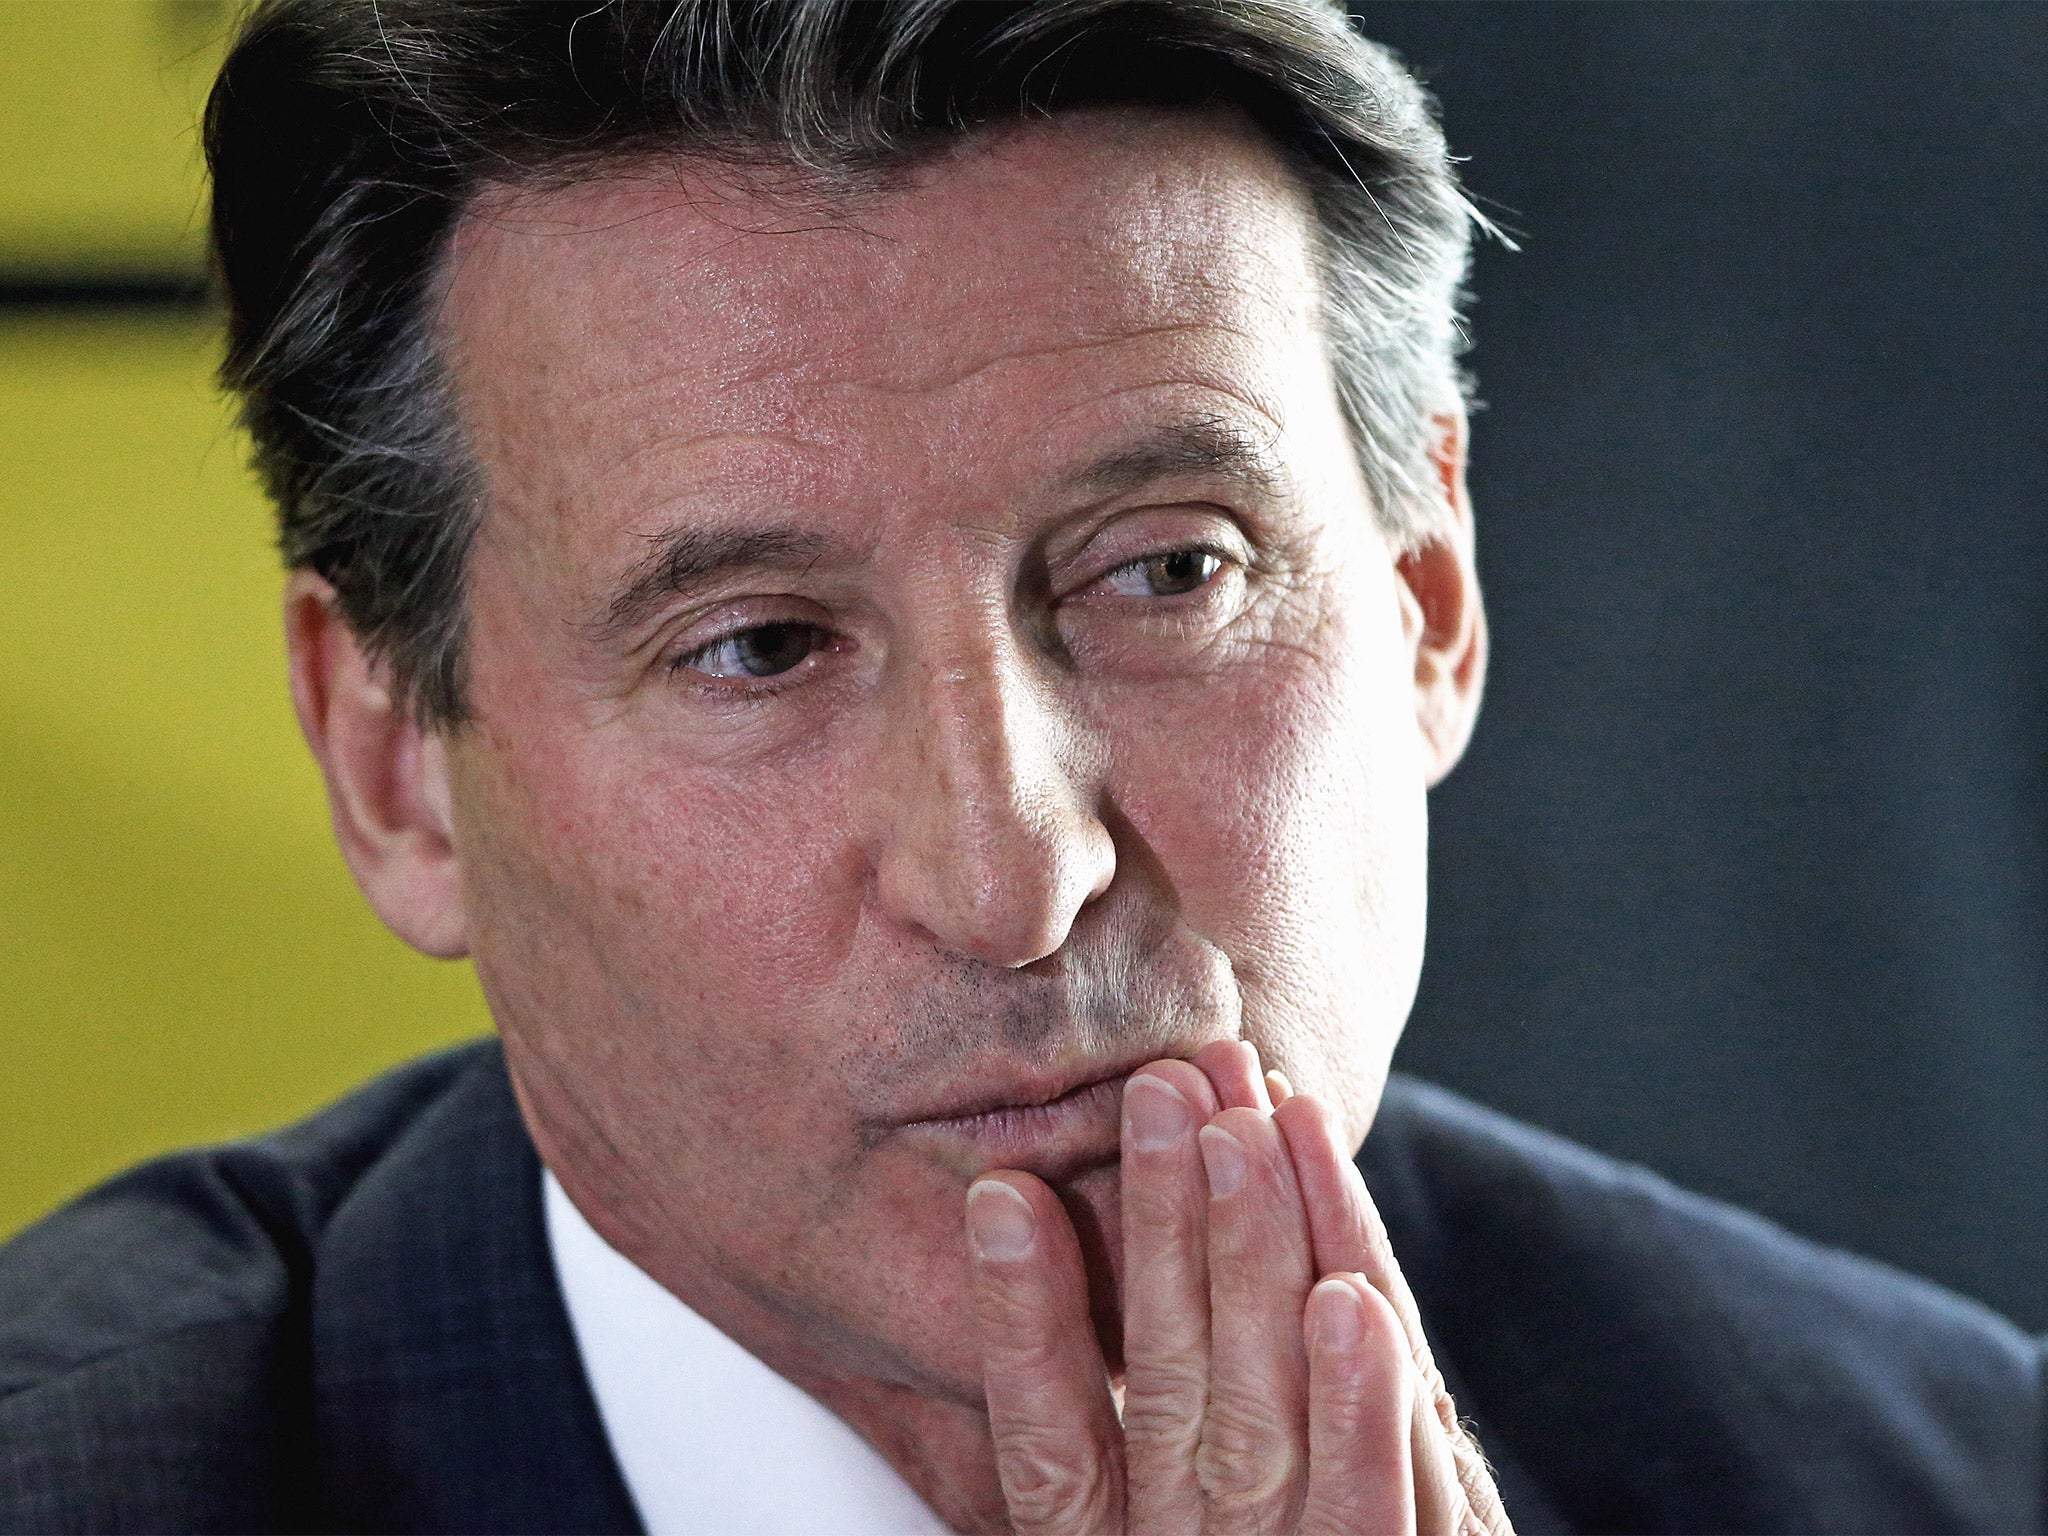 ‘They are very serious allegations,’ says Lord Coe